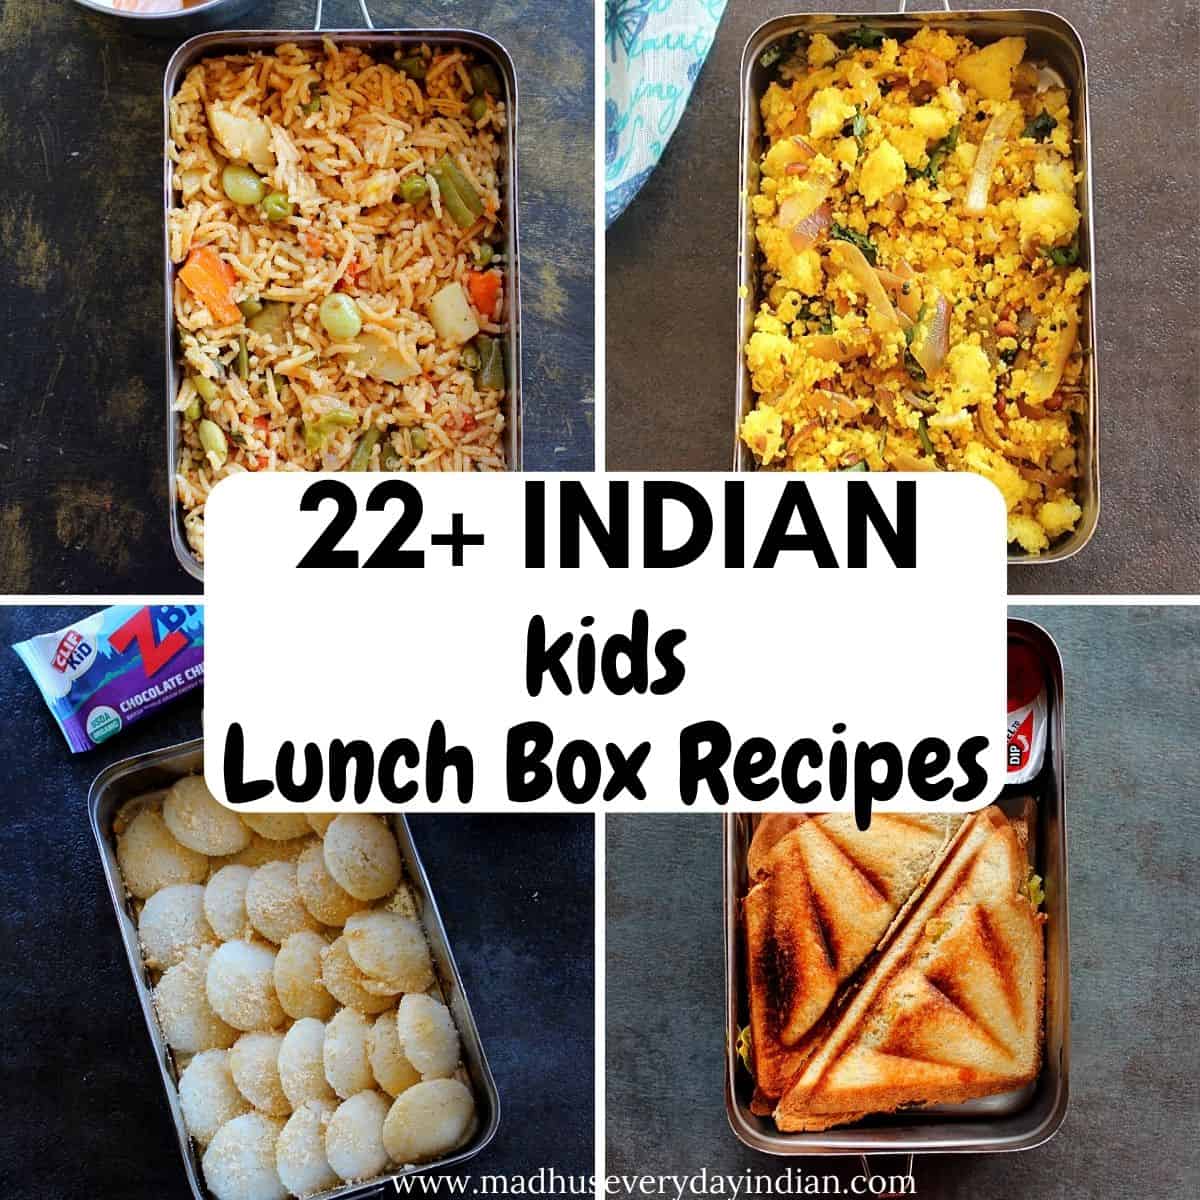 Easy Lunch Box Ideas For Kids (with pictures)